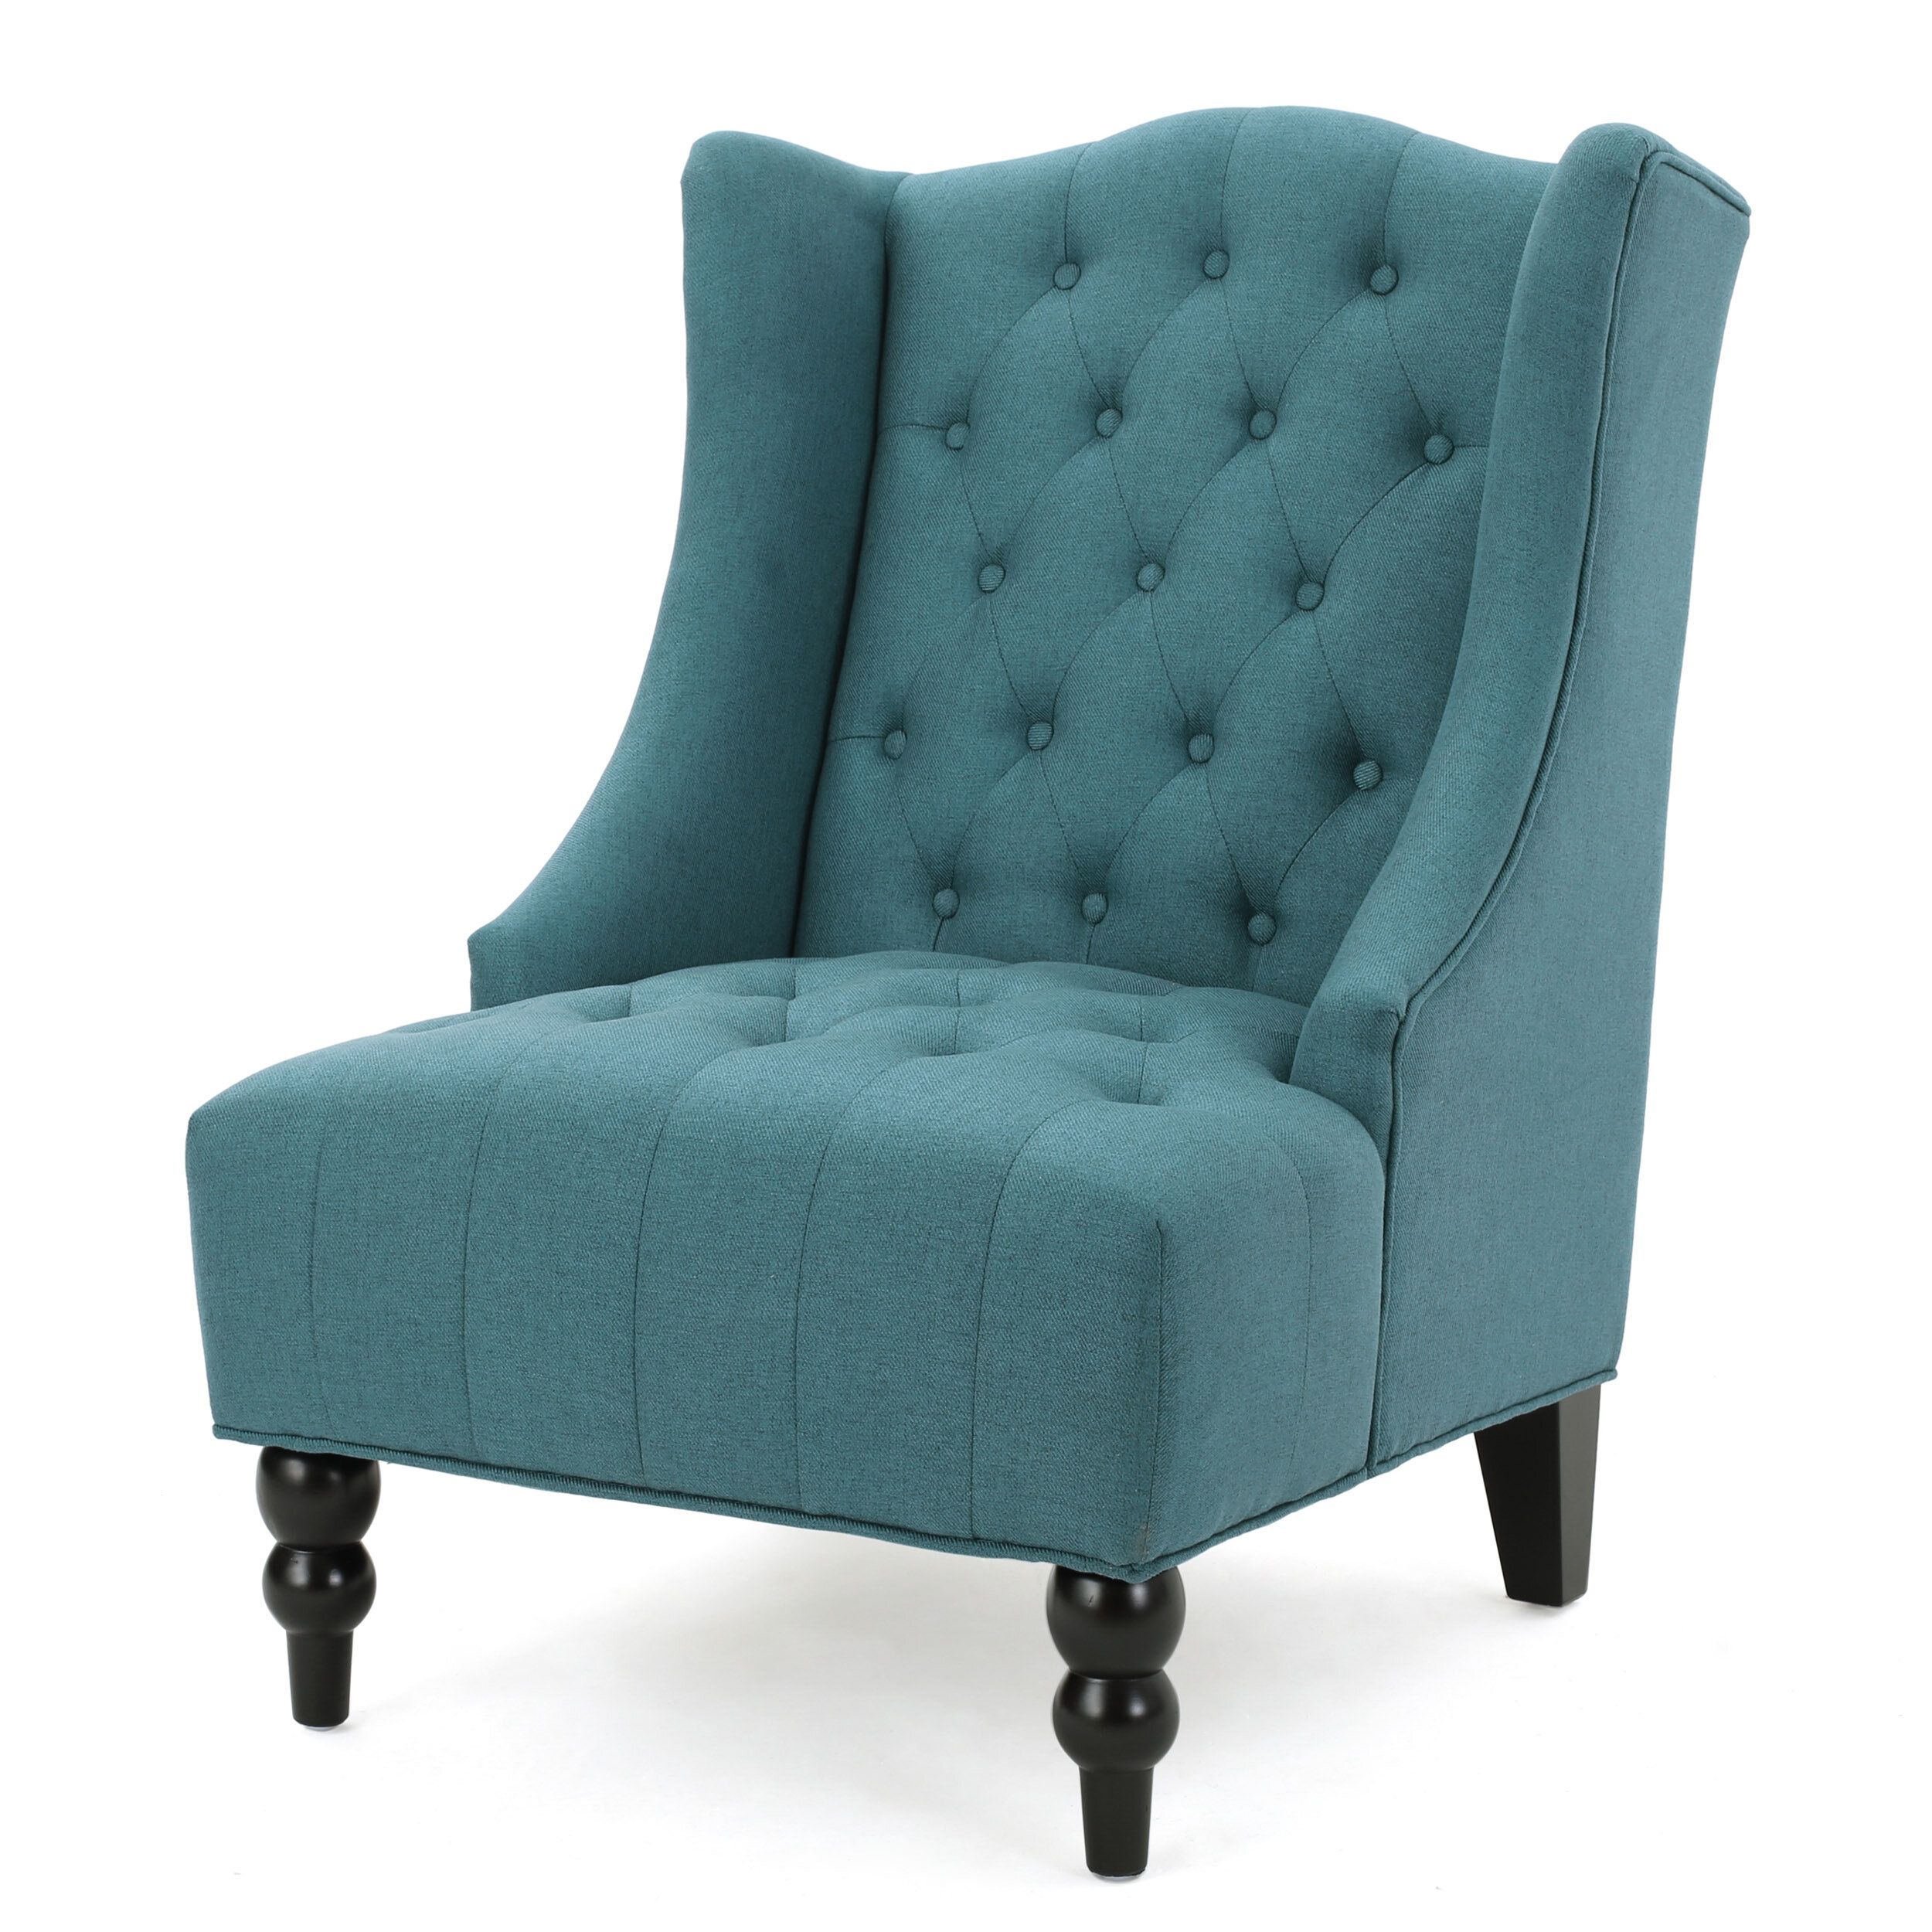 Contreras 21" Side Chair Intended For Allis Tufted Polyester Blend Wingback Chairs (View 10 of 15)